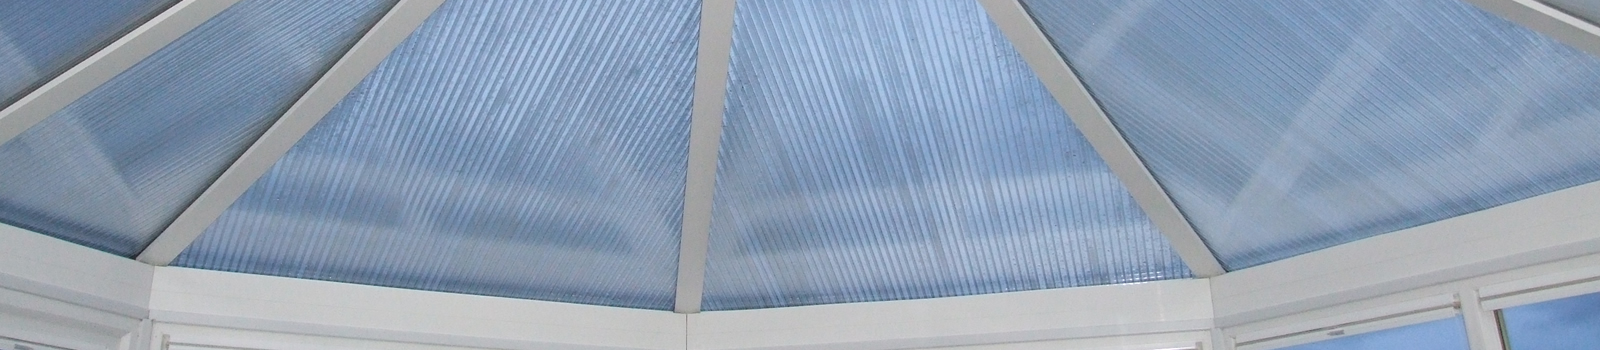 polycarbonate conservatory roofs